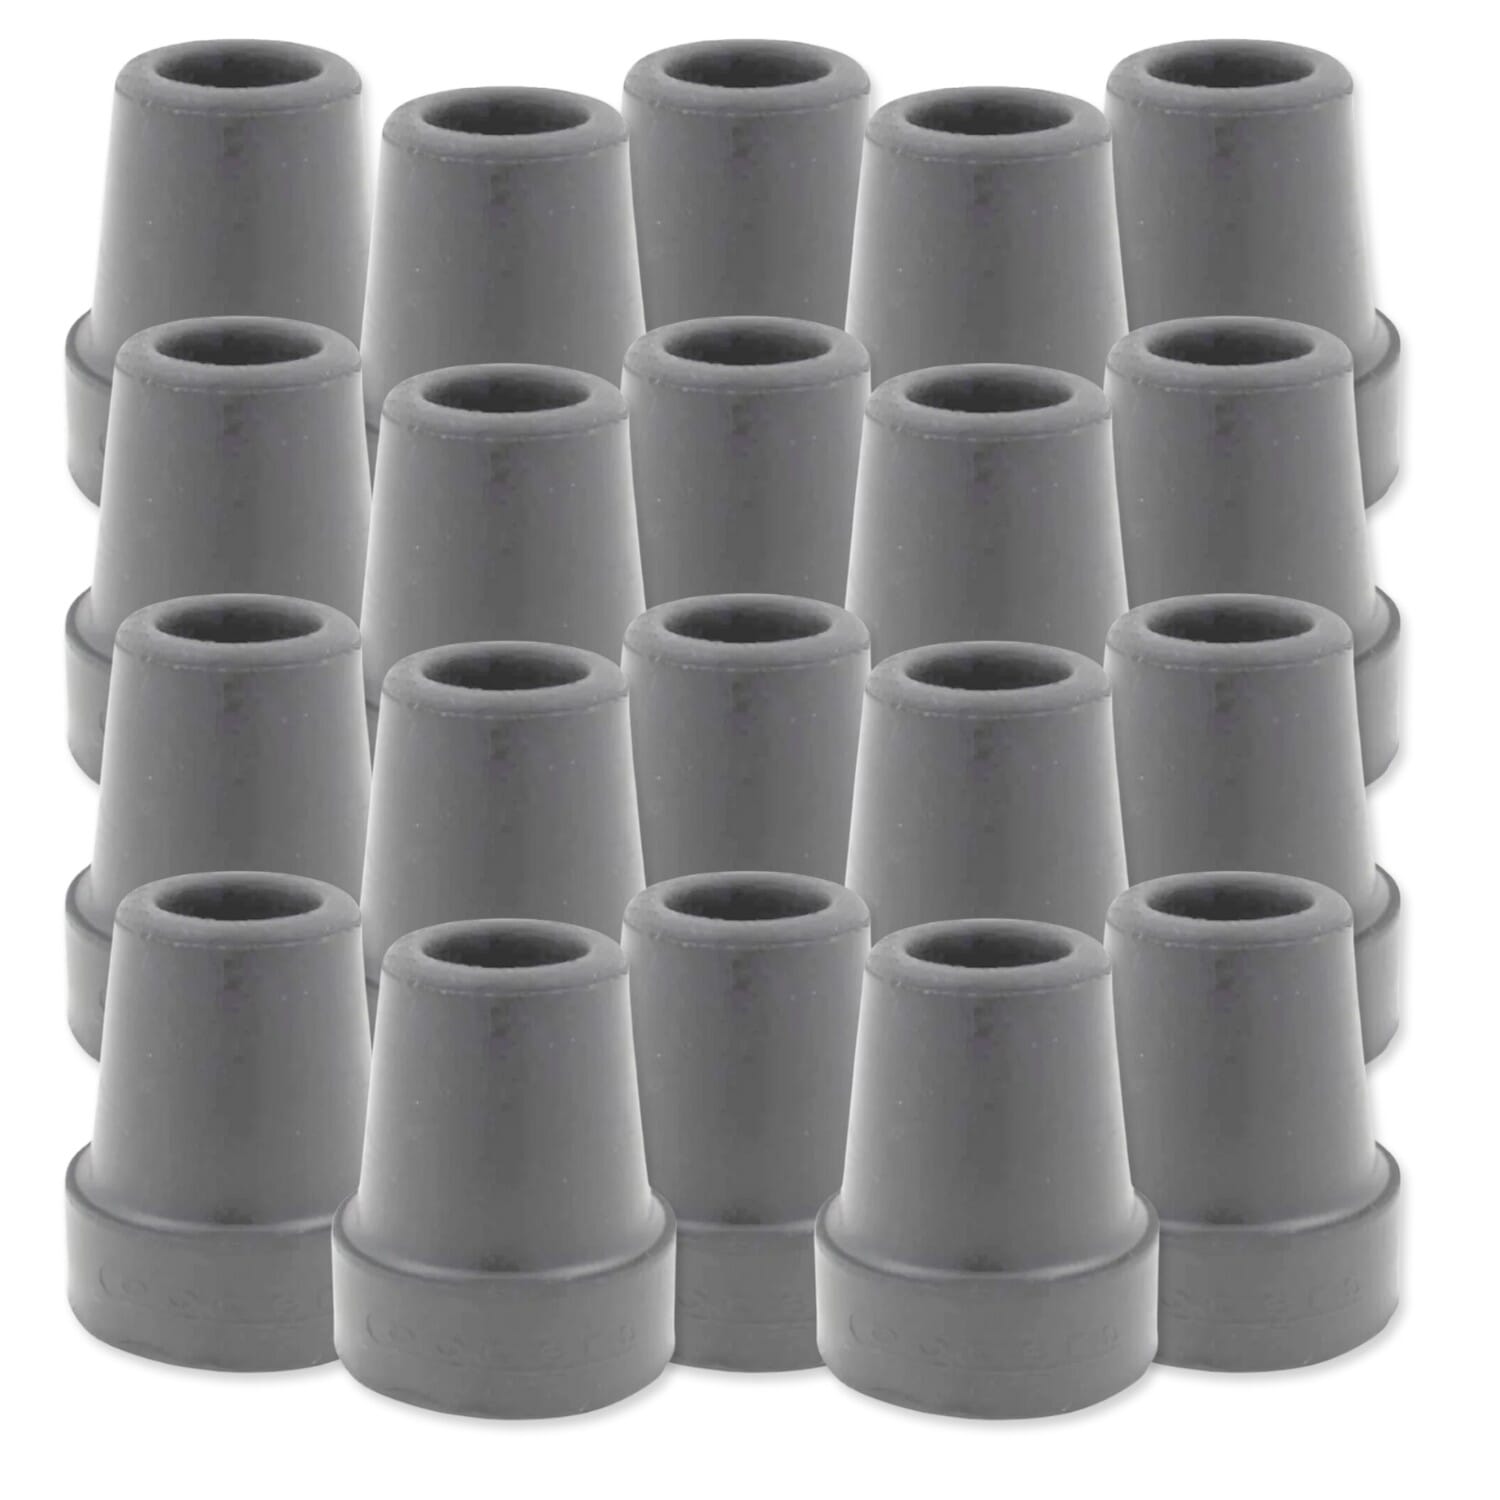 View Rubber Ends For Walking Sticks Rubber Ferrules 22mm grey pack of 20 information